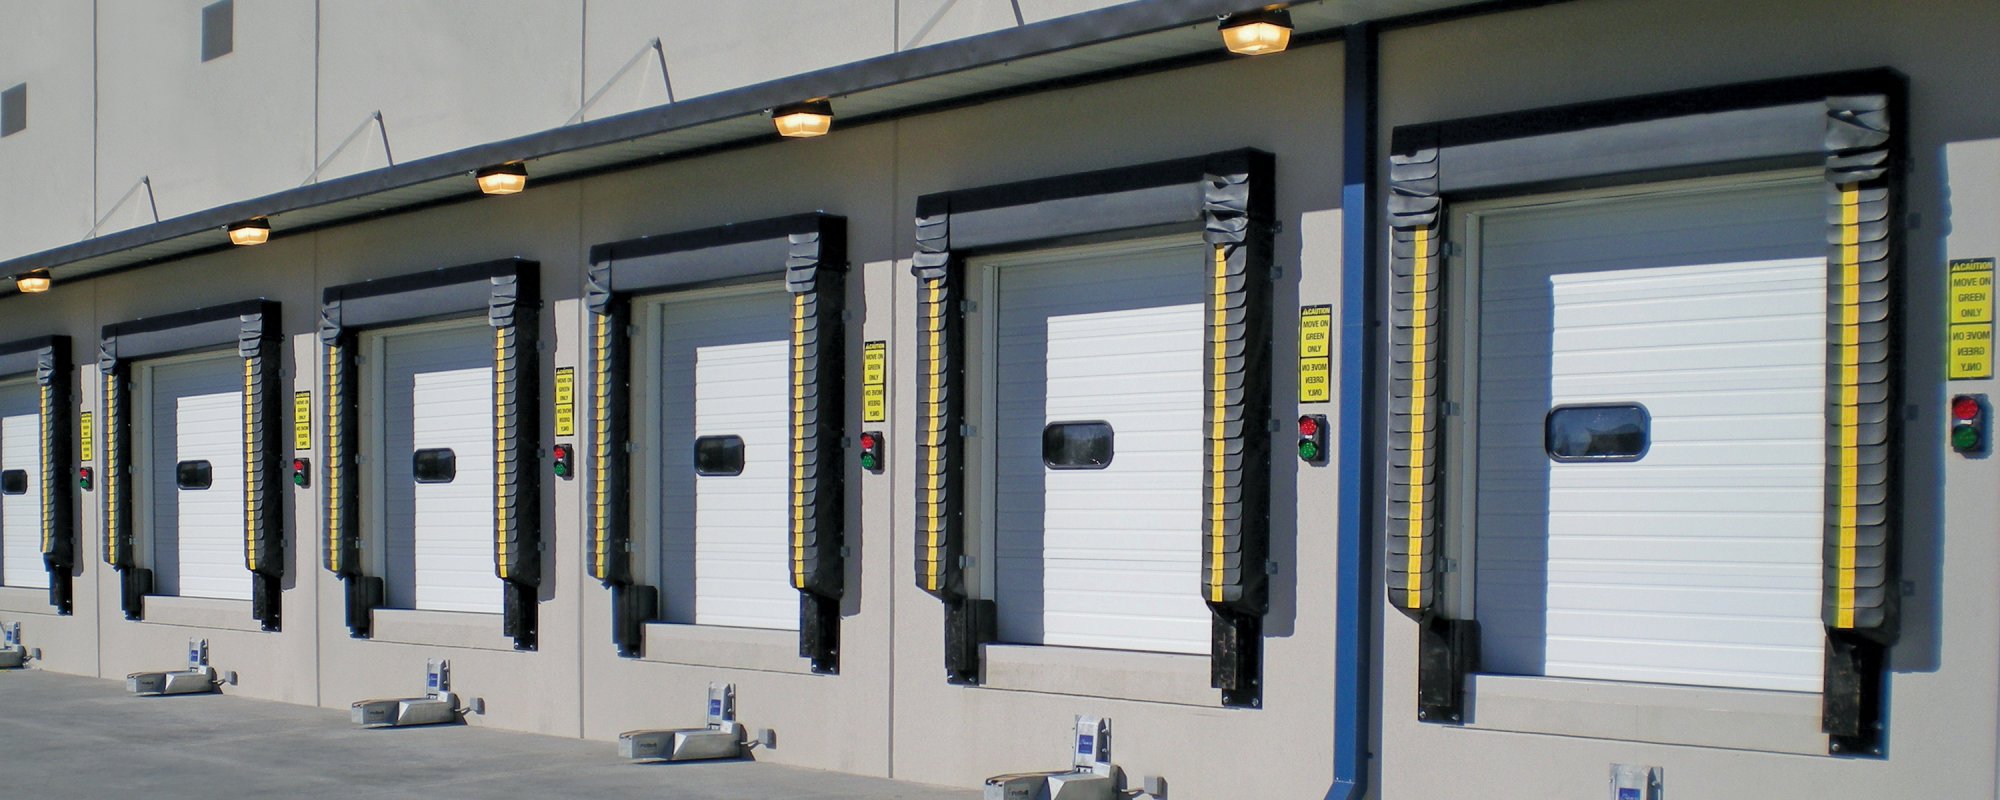 Loading Dock Equipment Boosts Safety, Efficiency